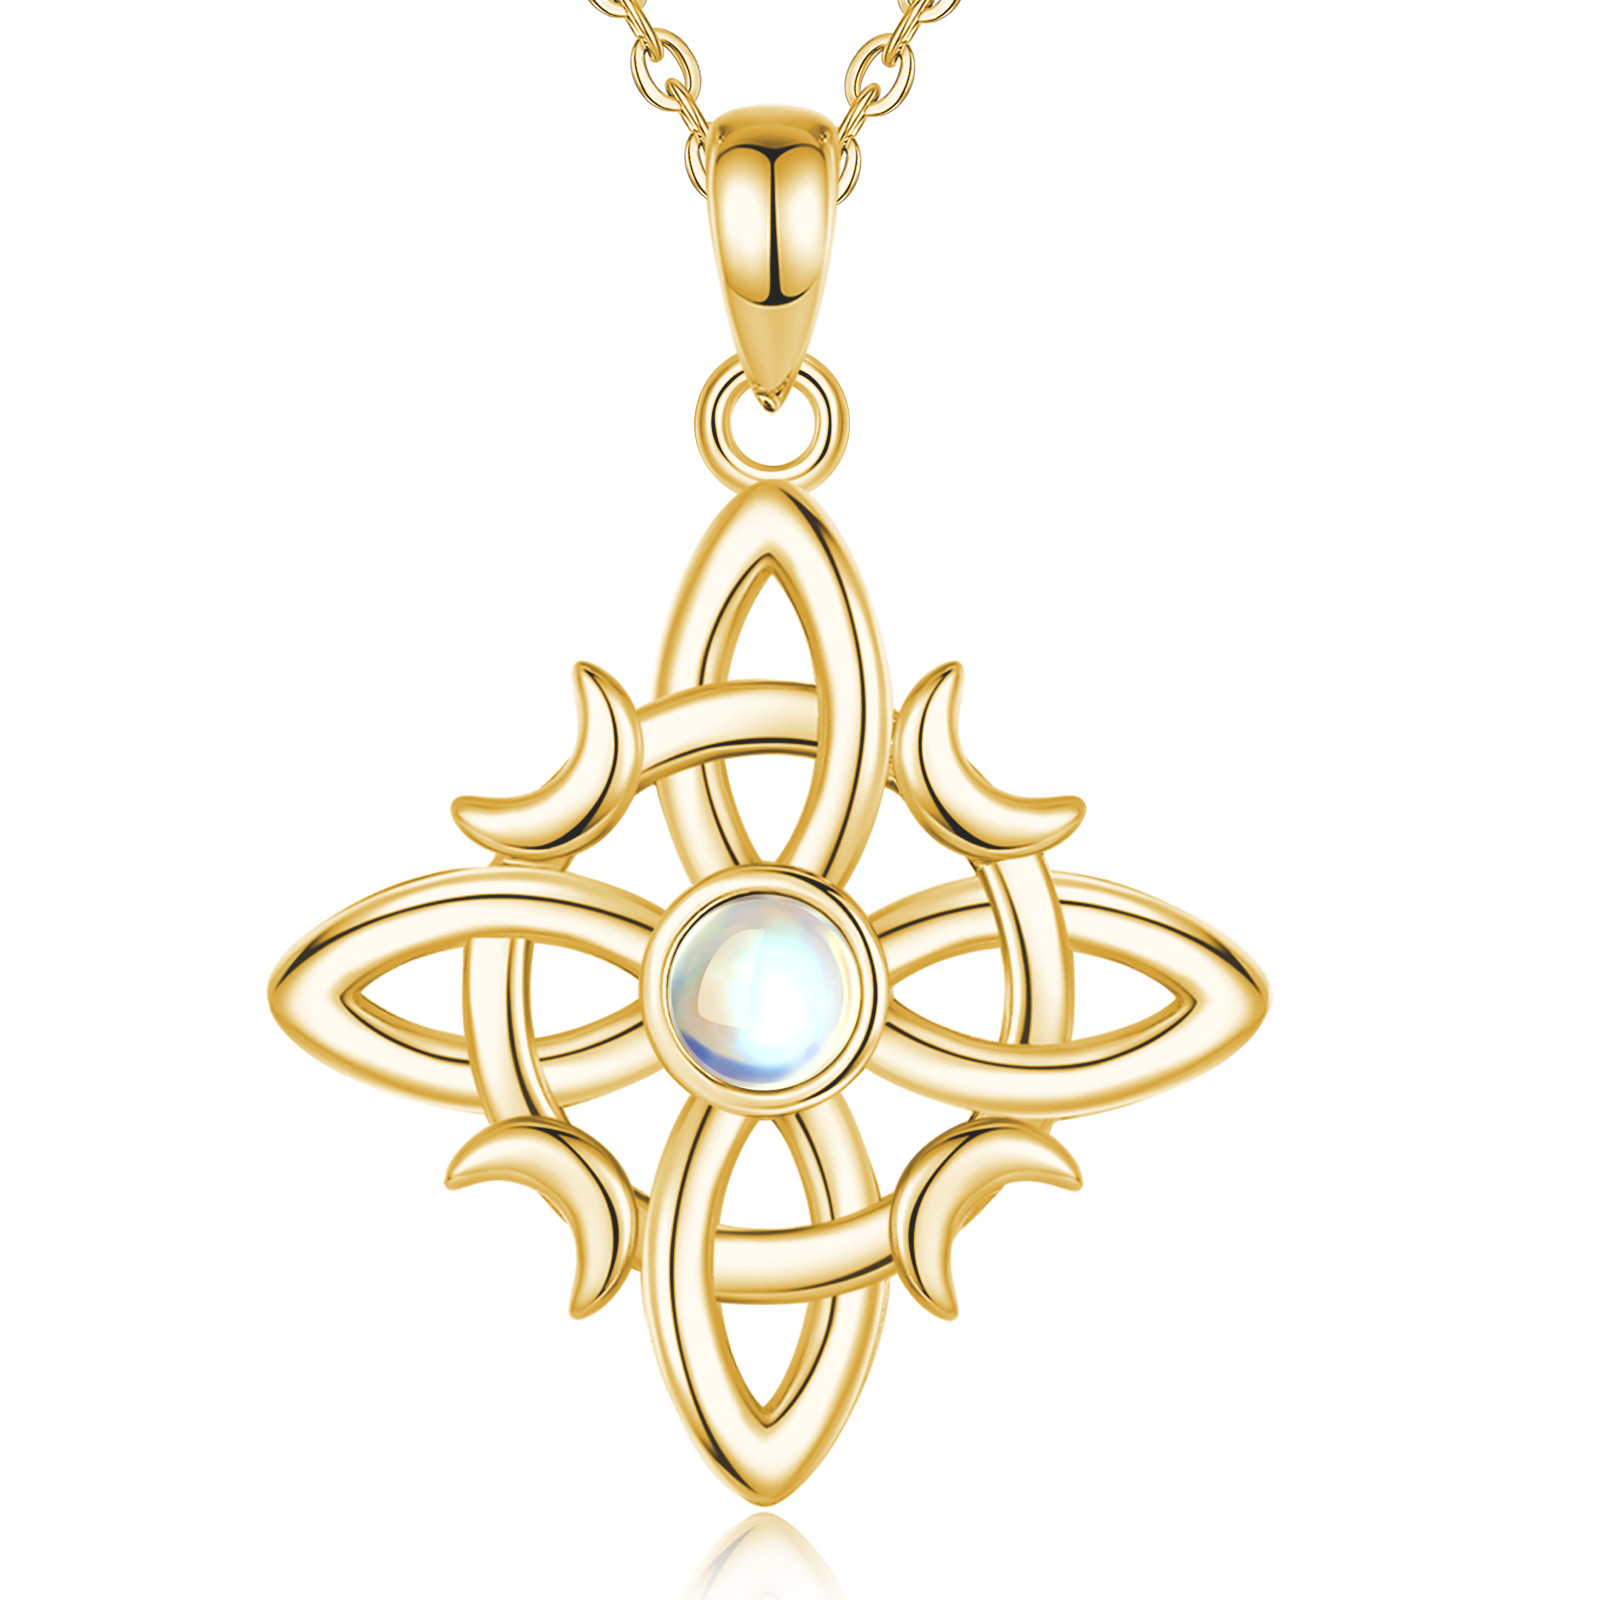 Merryshine Jewelry Wicca Knot Design 925 Sterling Silver 18K Gold Plated Vermeil Pendant Necklace with Moonstone